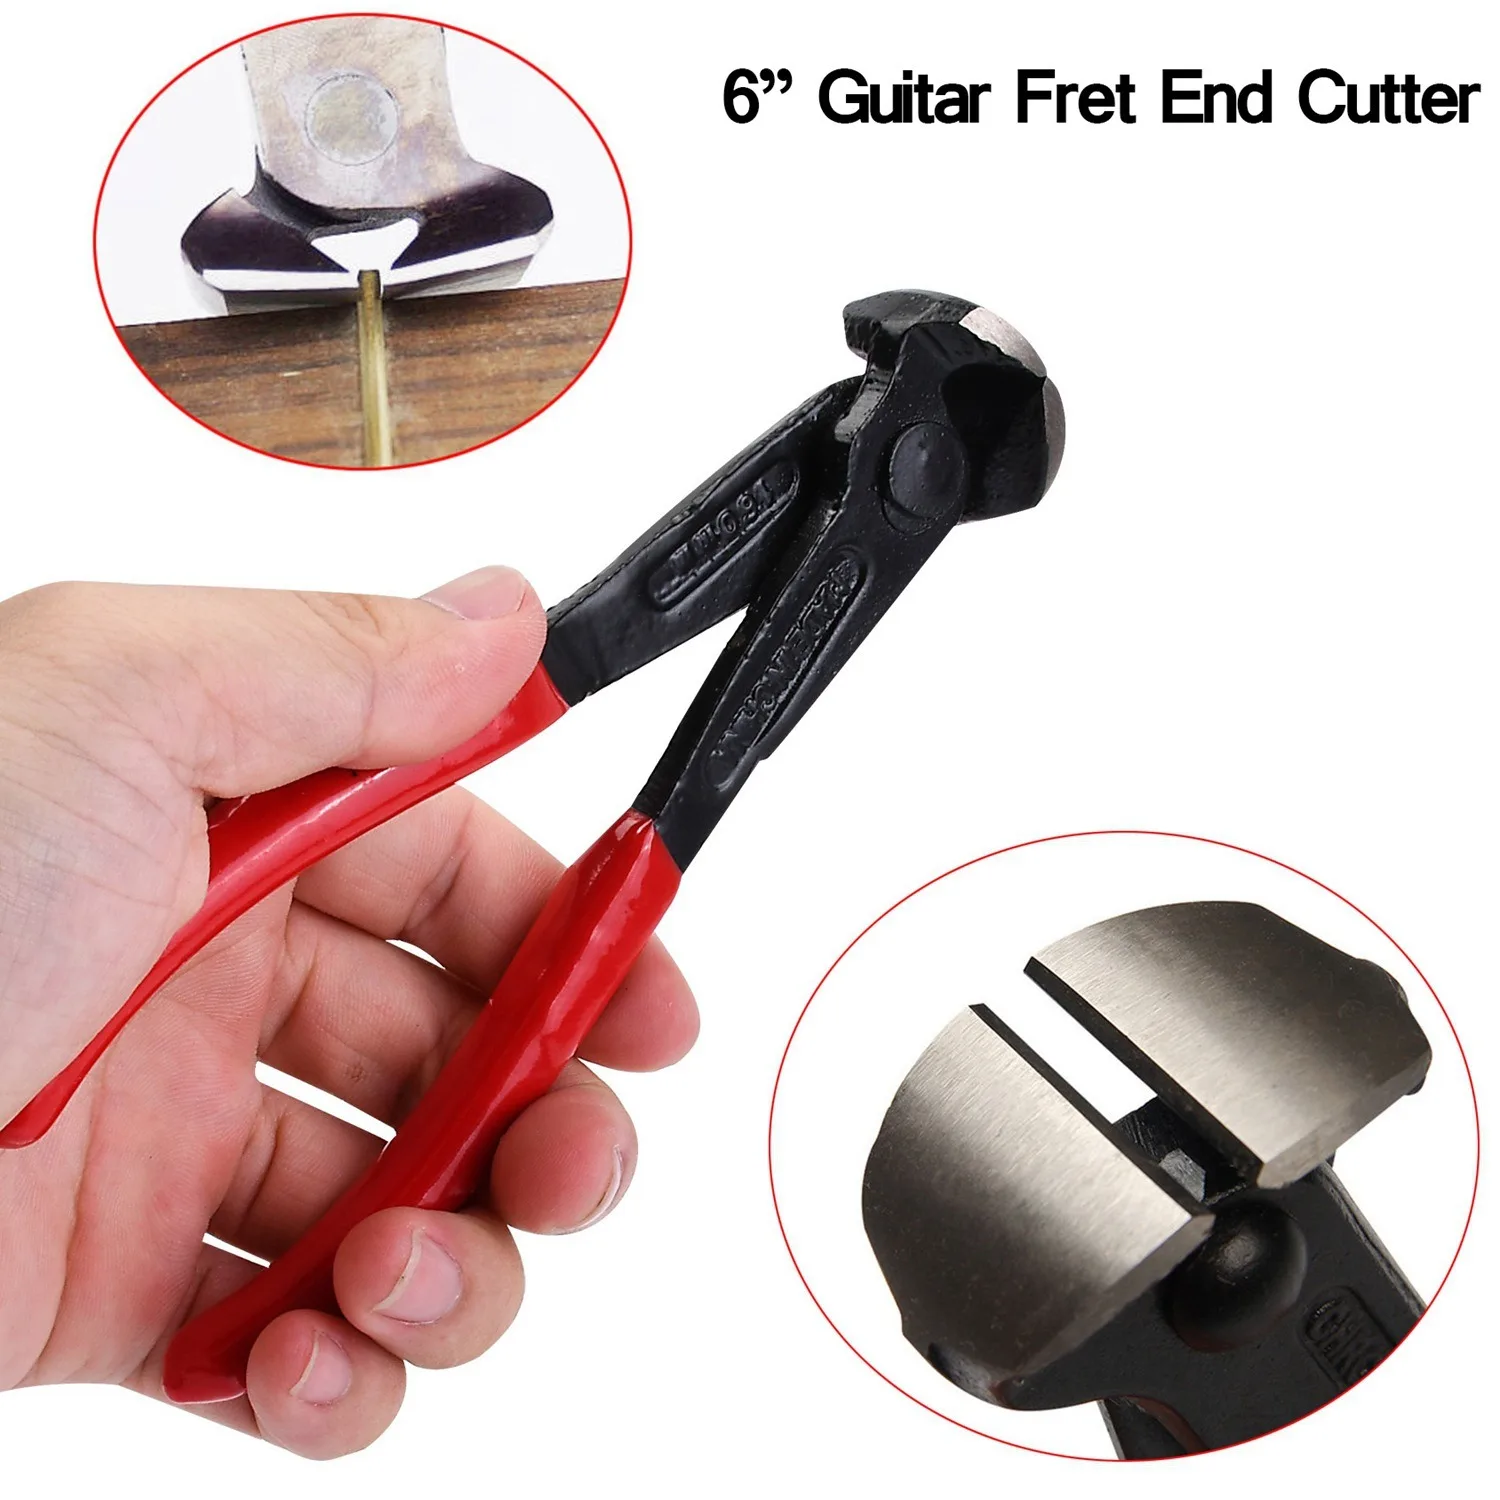 

6 Inch Guitar Fret Cut Pliers Stringed Instrument Wire Cutters Luthier Tools Plier String Scissors For Guitar Violin Repair Tool